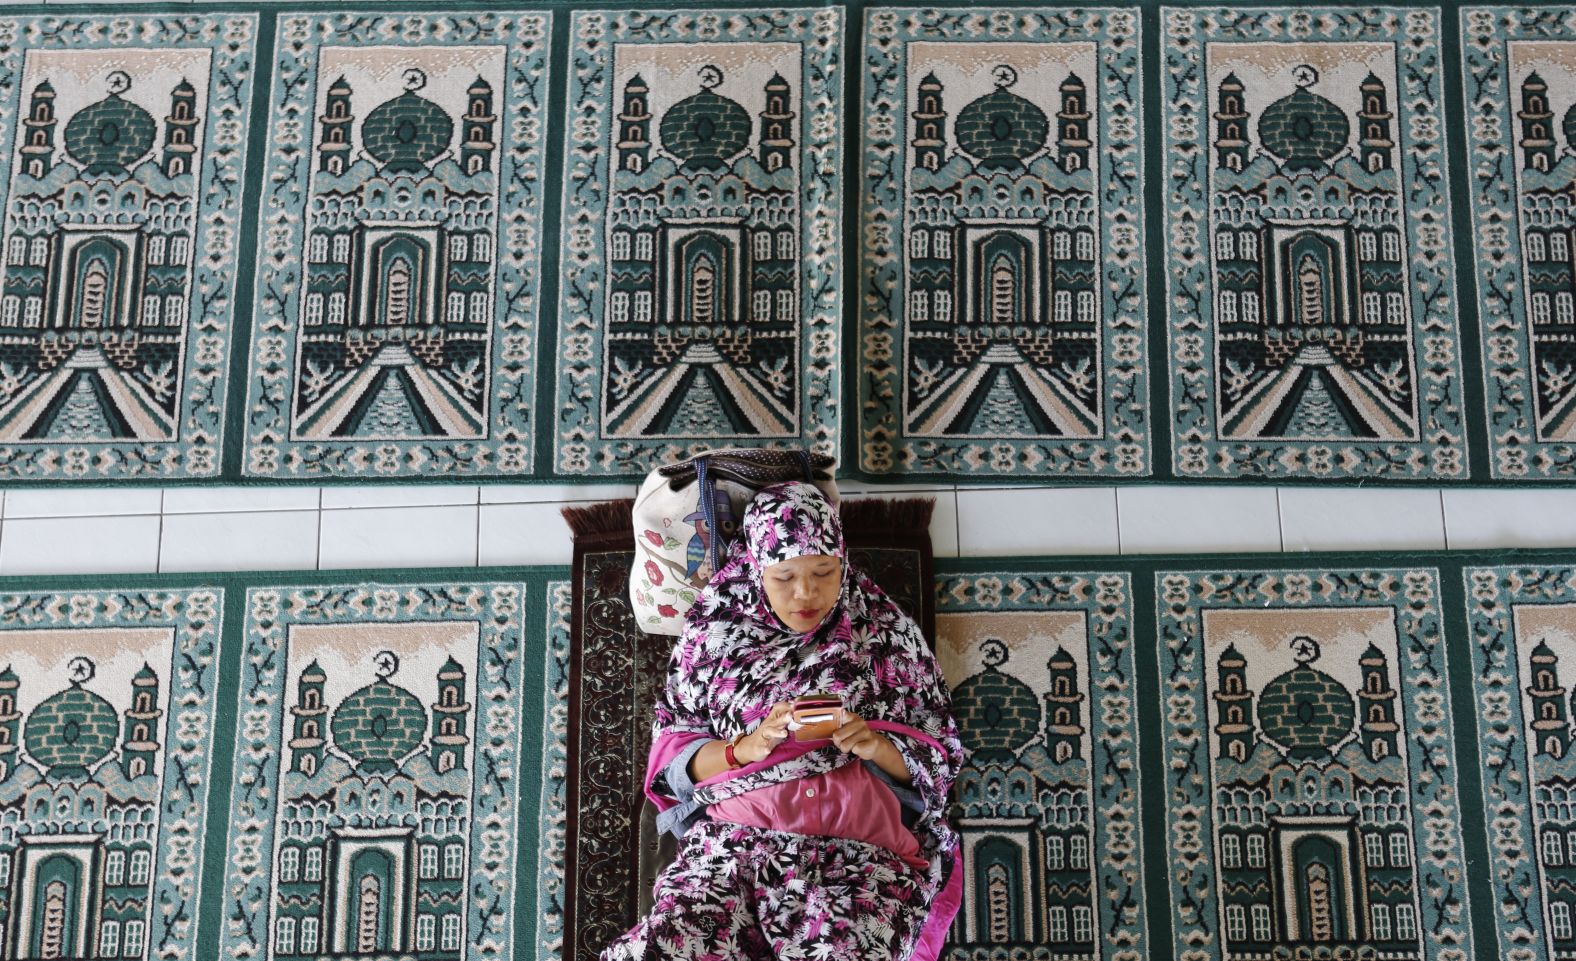 A woman rests at a mosque during the first day of the holy fasting month of Ramadan Monday, May 6, in Bali, Indonesia.